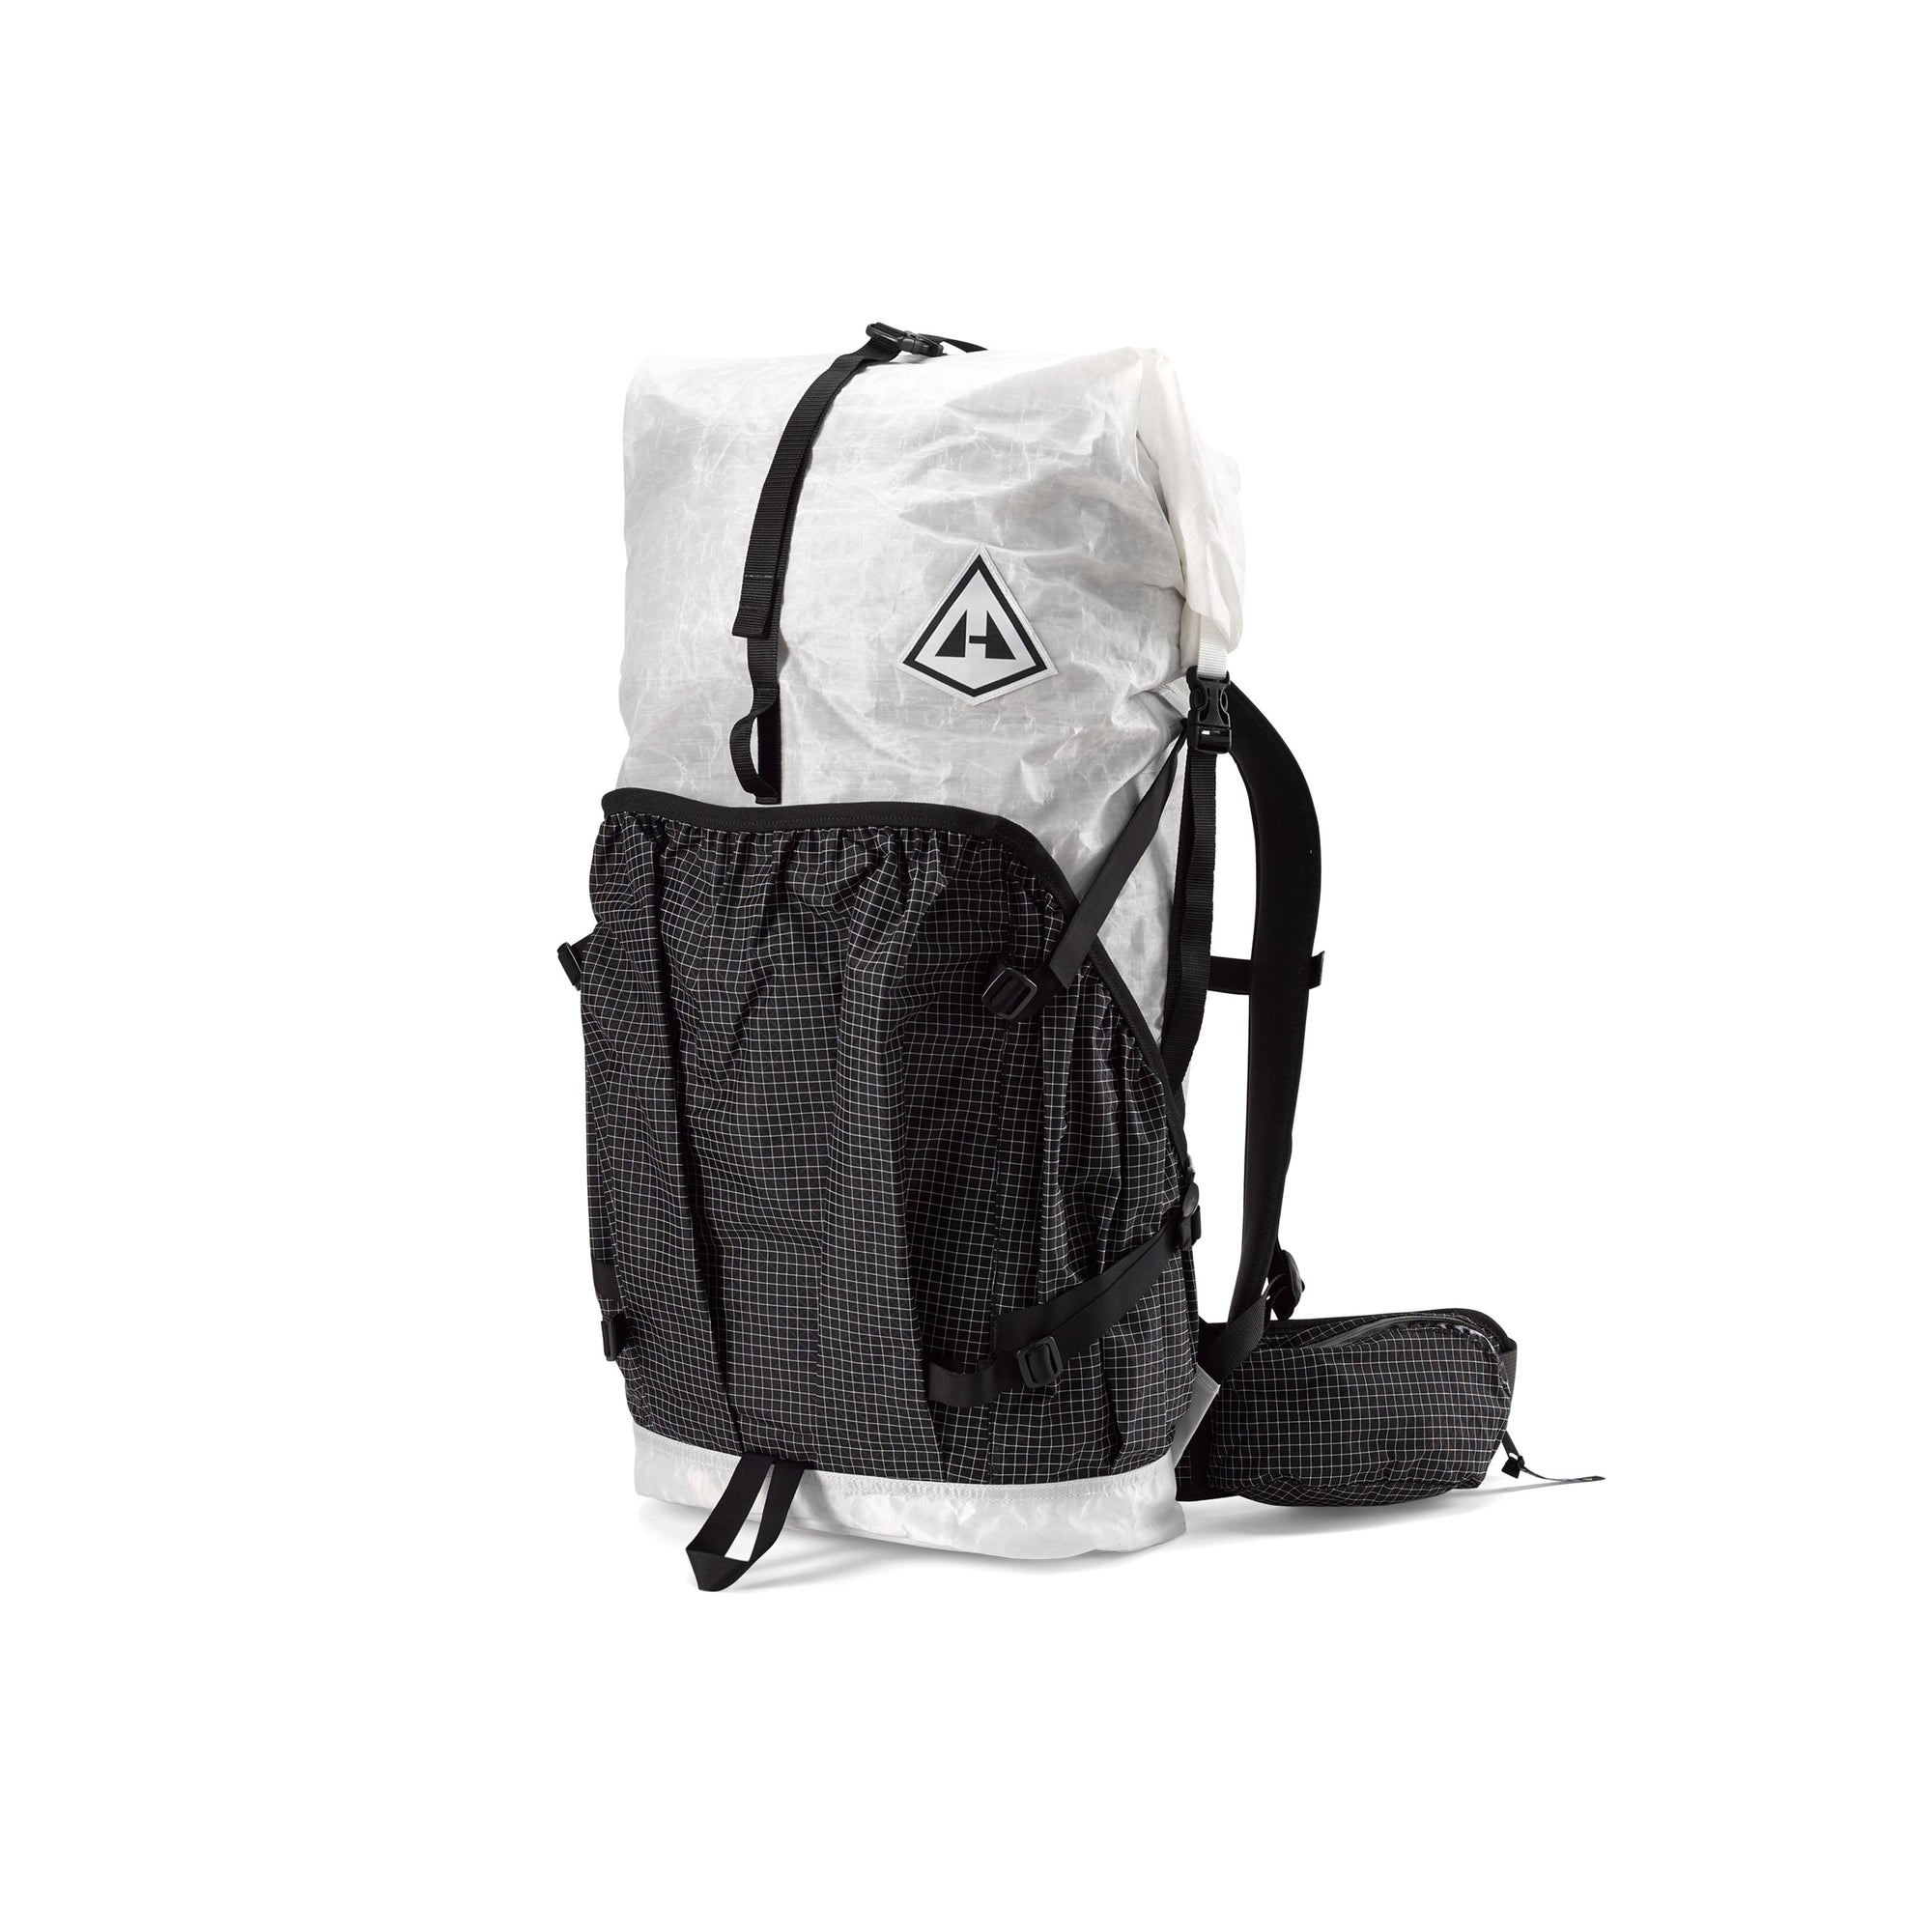 Grand Off White Backpack  Free delivery for orders above 20